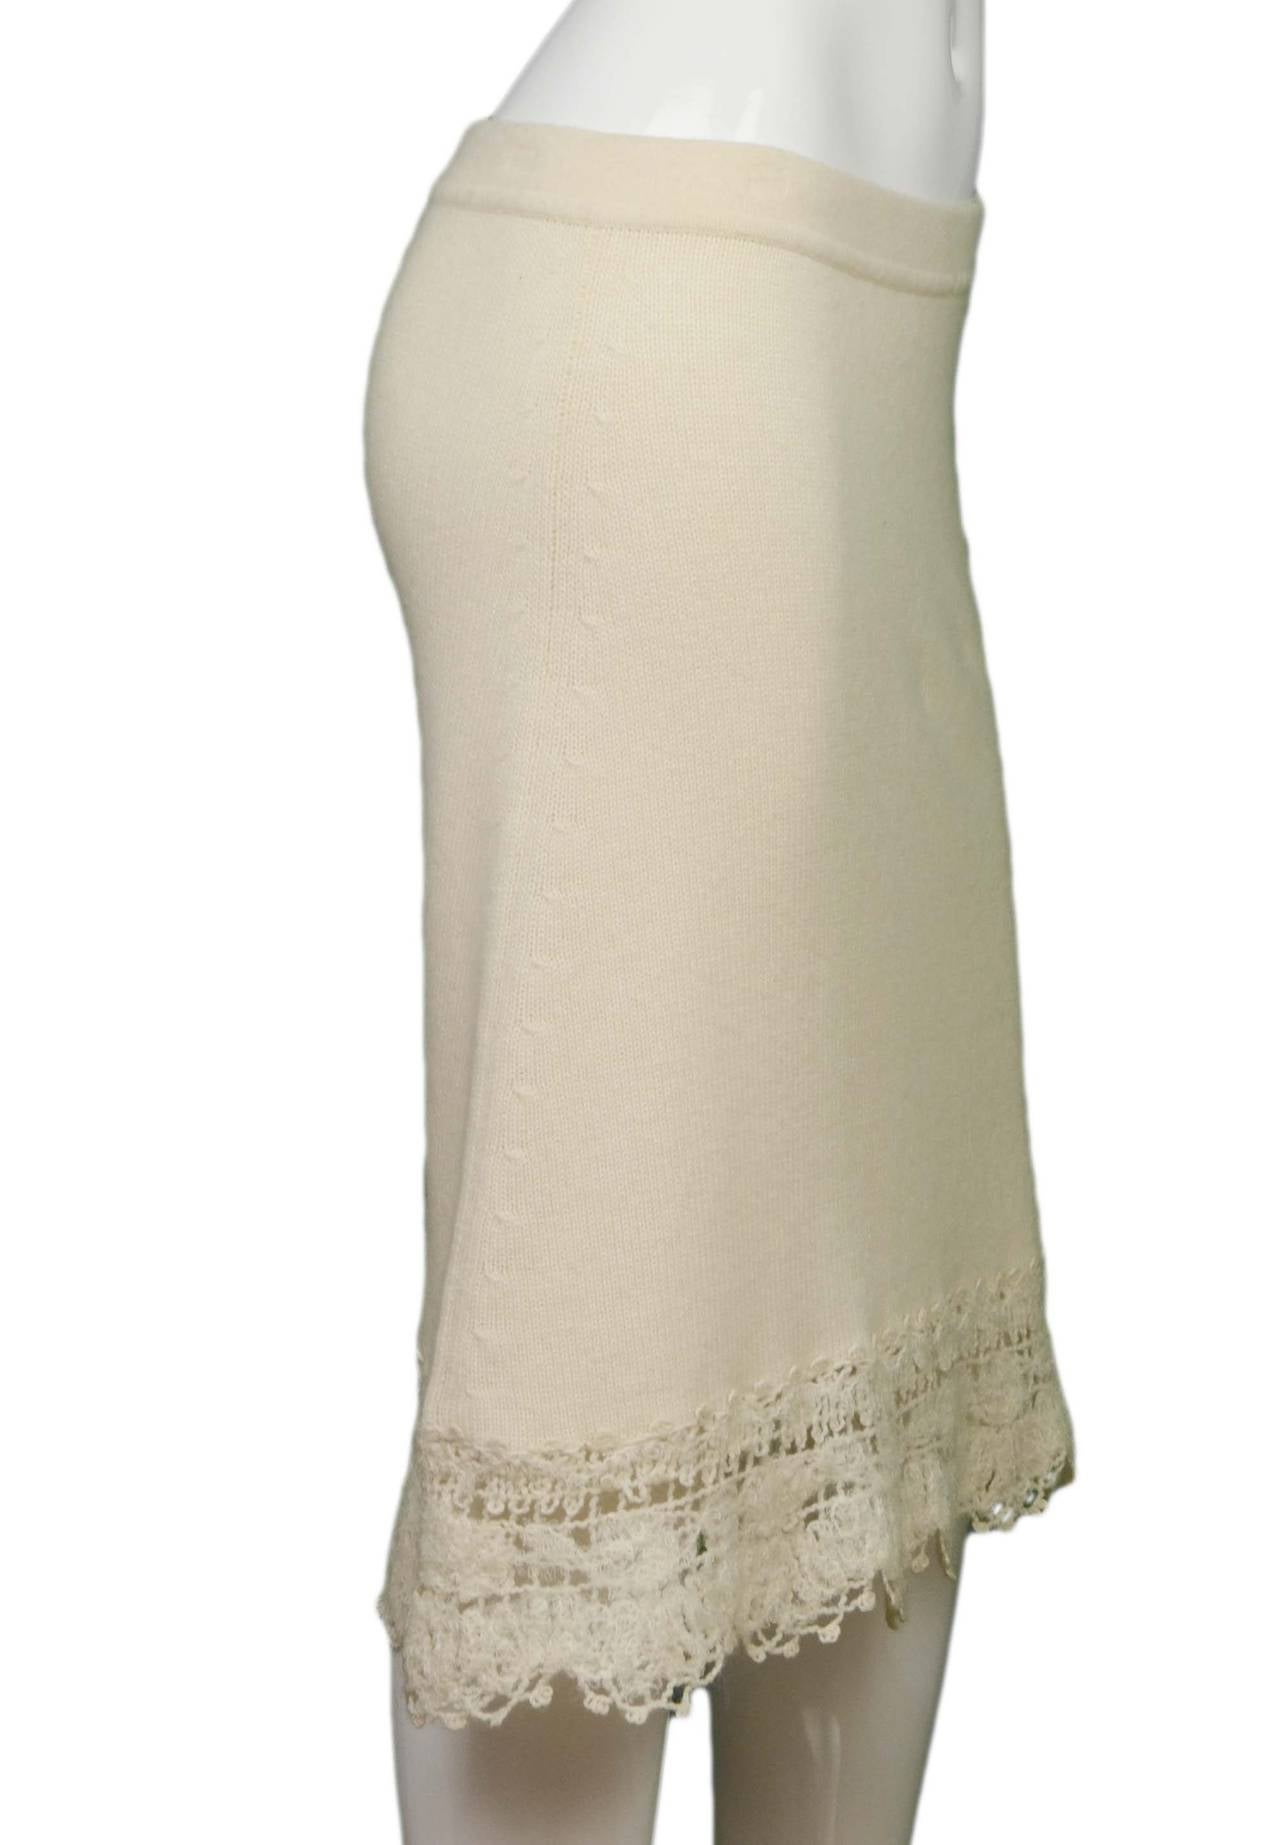 Chanel Cream Cashmere Skirt 
Features crochet trim at hemline
Made in: Italy
Year of Production: 2006
Color: Cream
Composition: 95% cashmere, 2% nylon, 2% mohair, 1% wool
Lining: None
Closure/opening: Pull on
Exterior Pockets: None
Interior